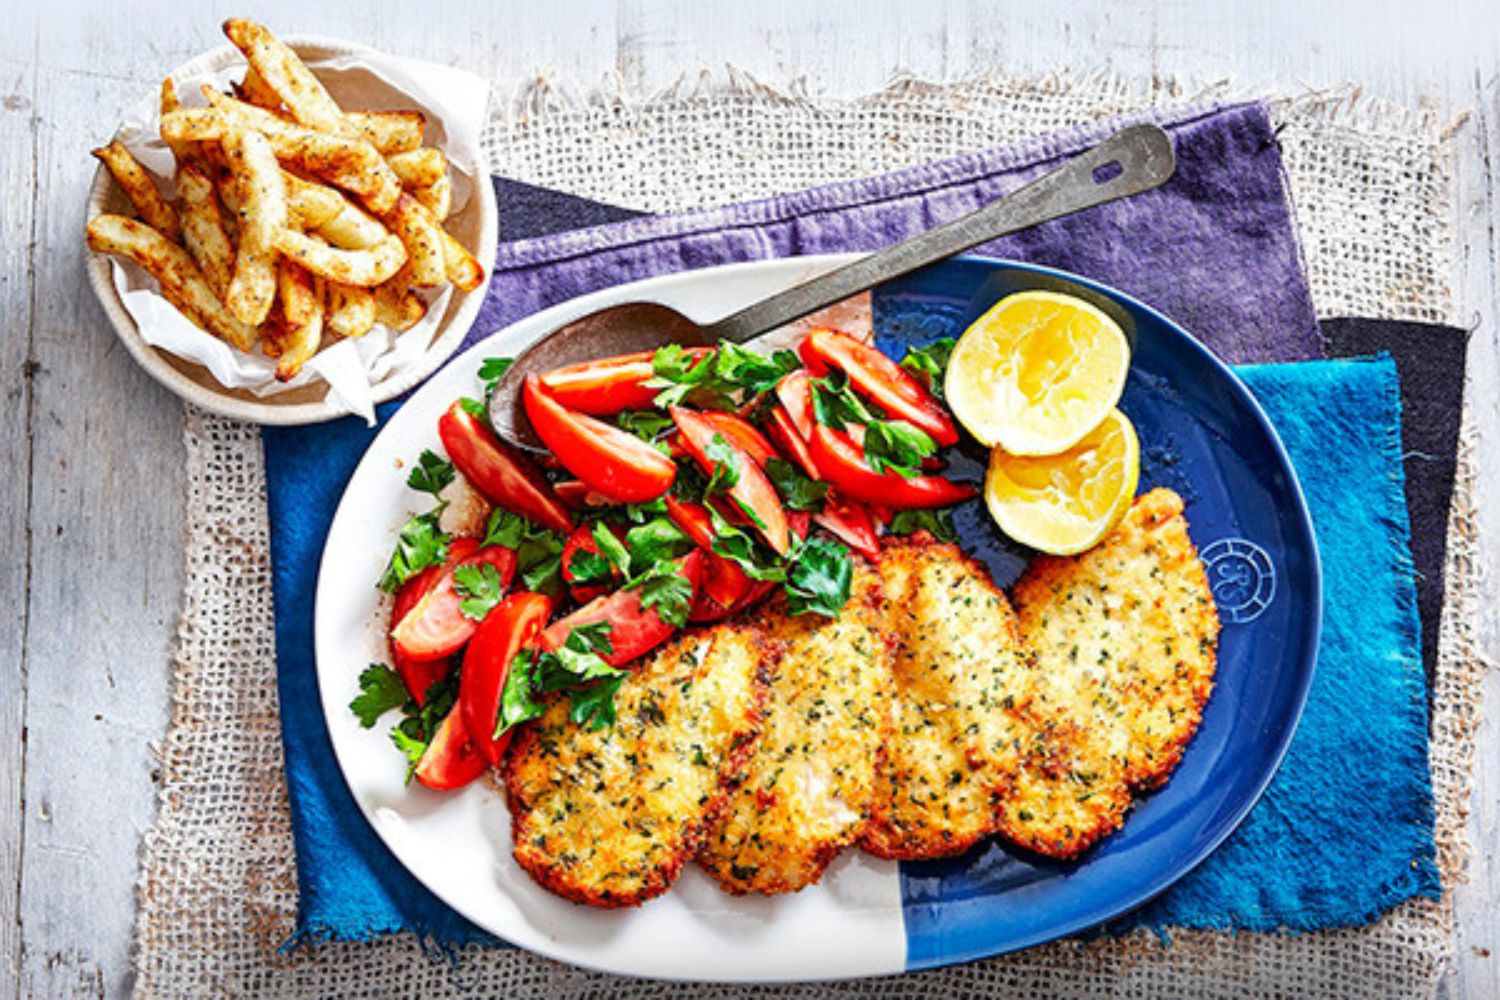 panko-and-parmesan-crumbed-chicken-with-tomato-salad